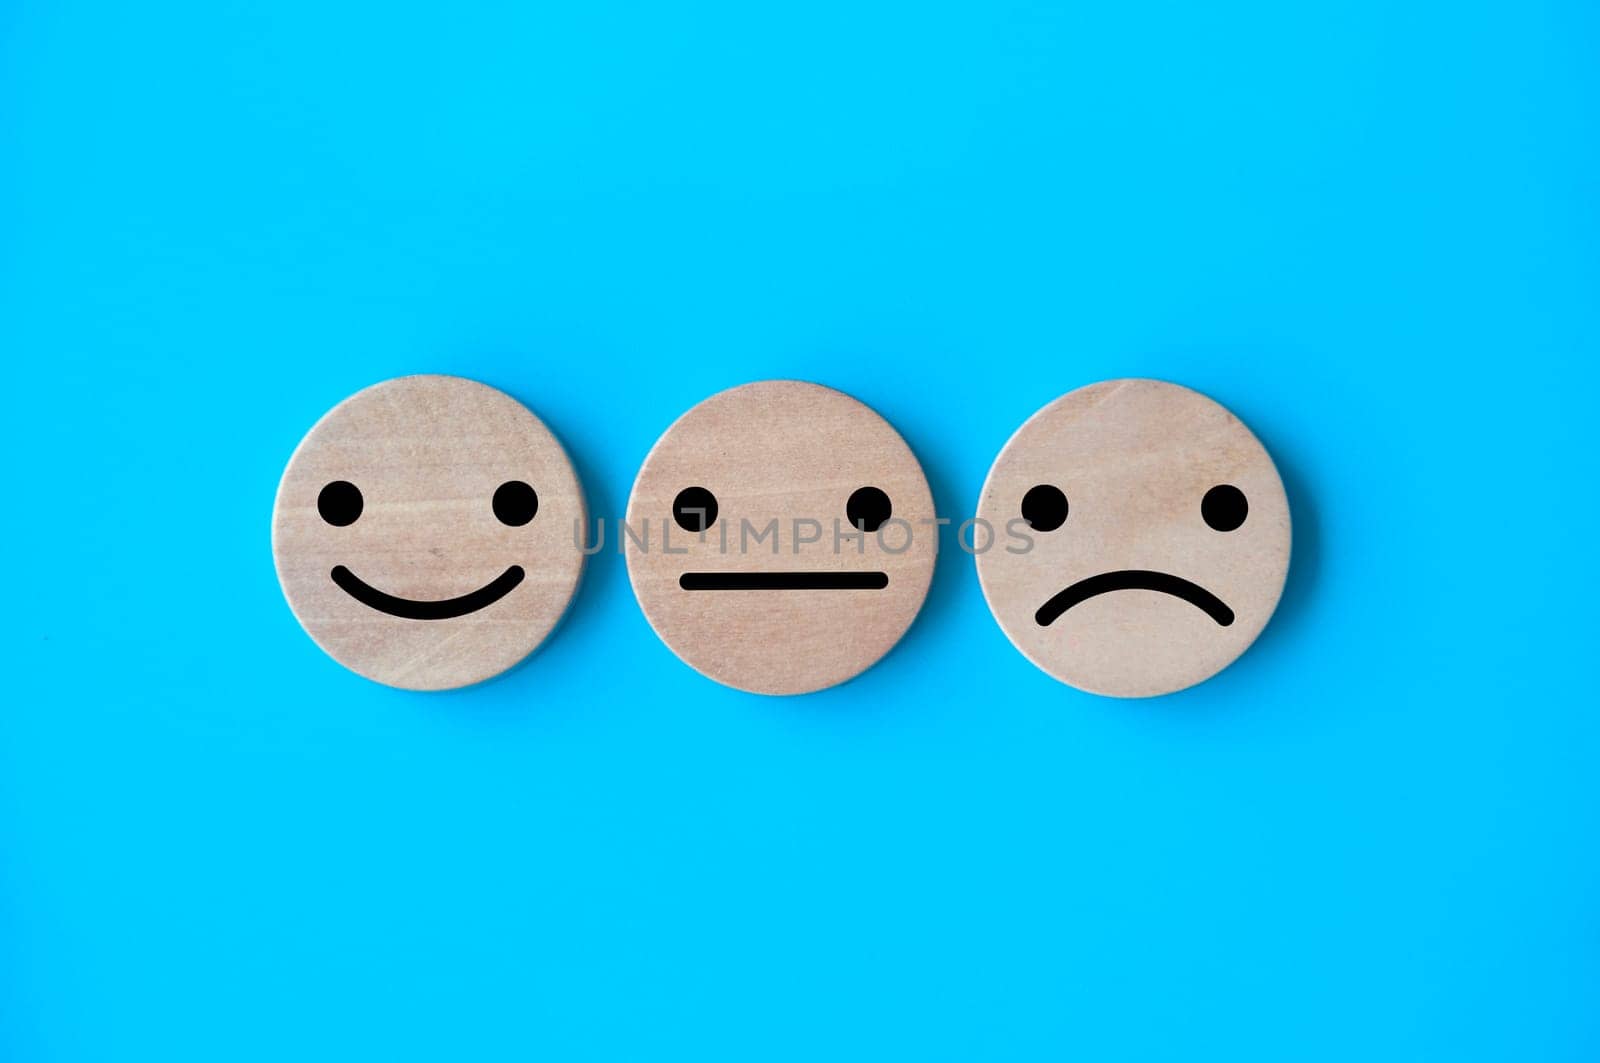 Neutral, happy and sad emotion faces on wooden cubes. Customer satisfaction and evaluation concep by yom98